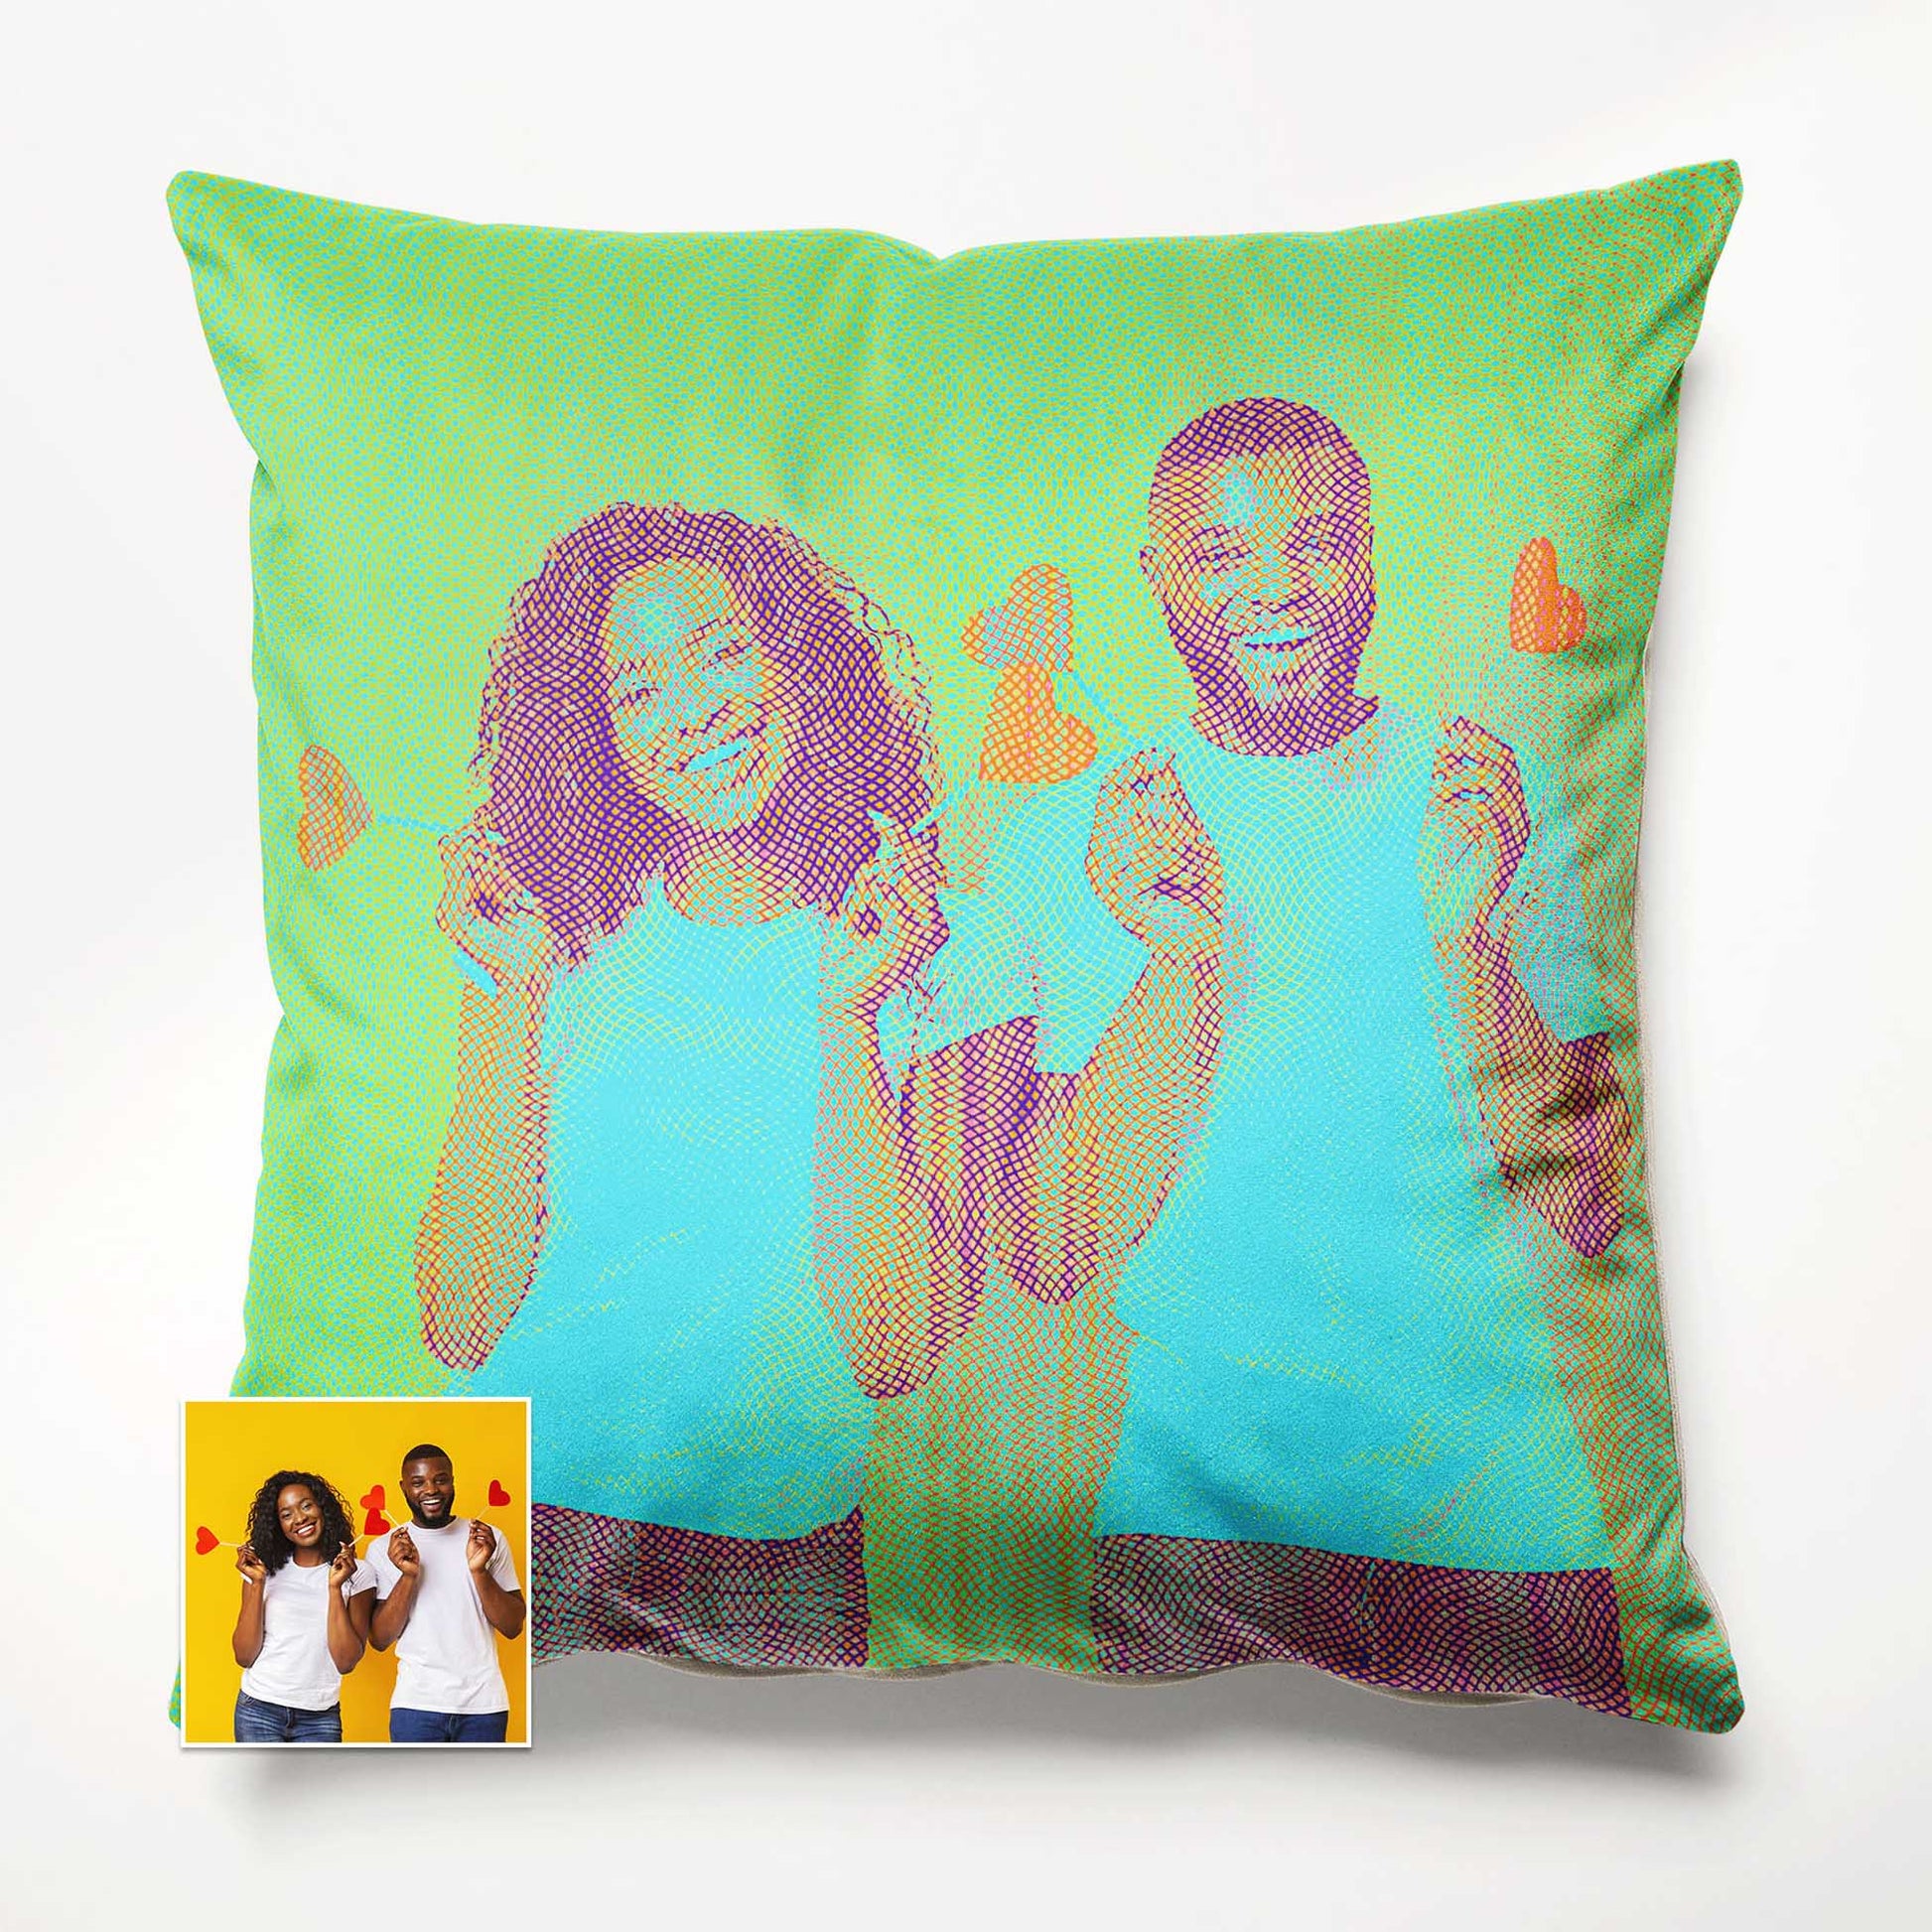 Express your individuality with the Personalised Blue Engraved Cushion. Crafted from soft velvet fabric, this cool and fresh cushion allows you to print your photo, creating a fun and personalised accessory, handmade 